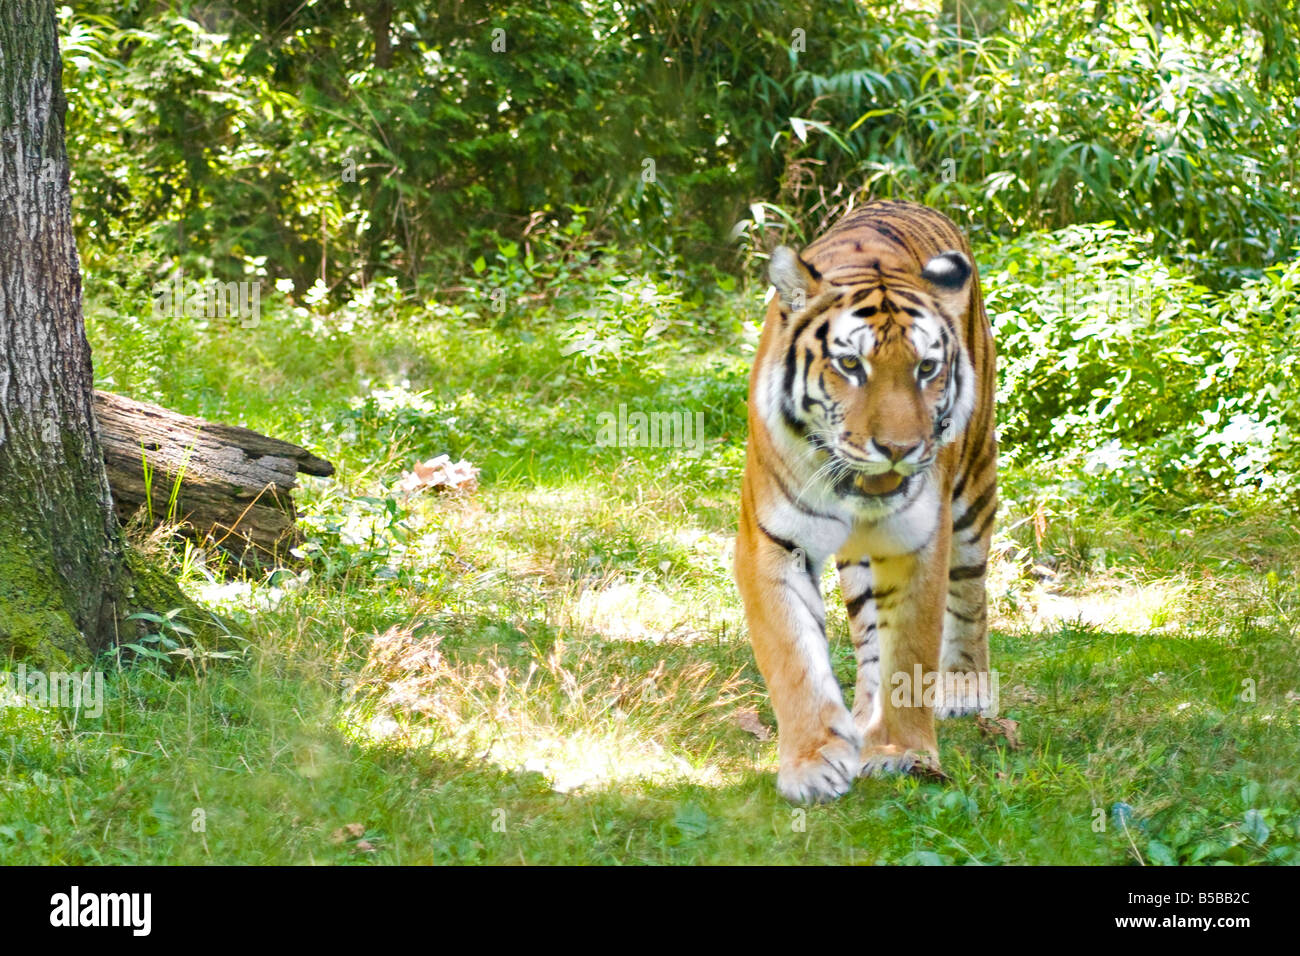 A ferocious tiger on the prowl in a natural setting Stock Photo